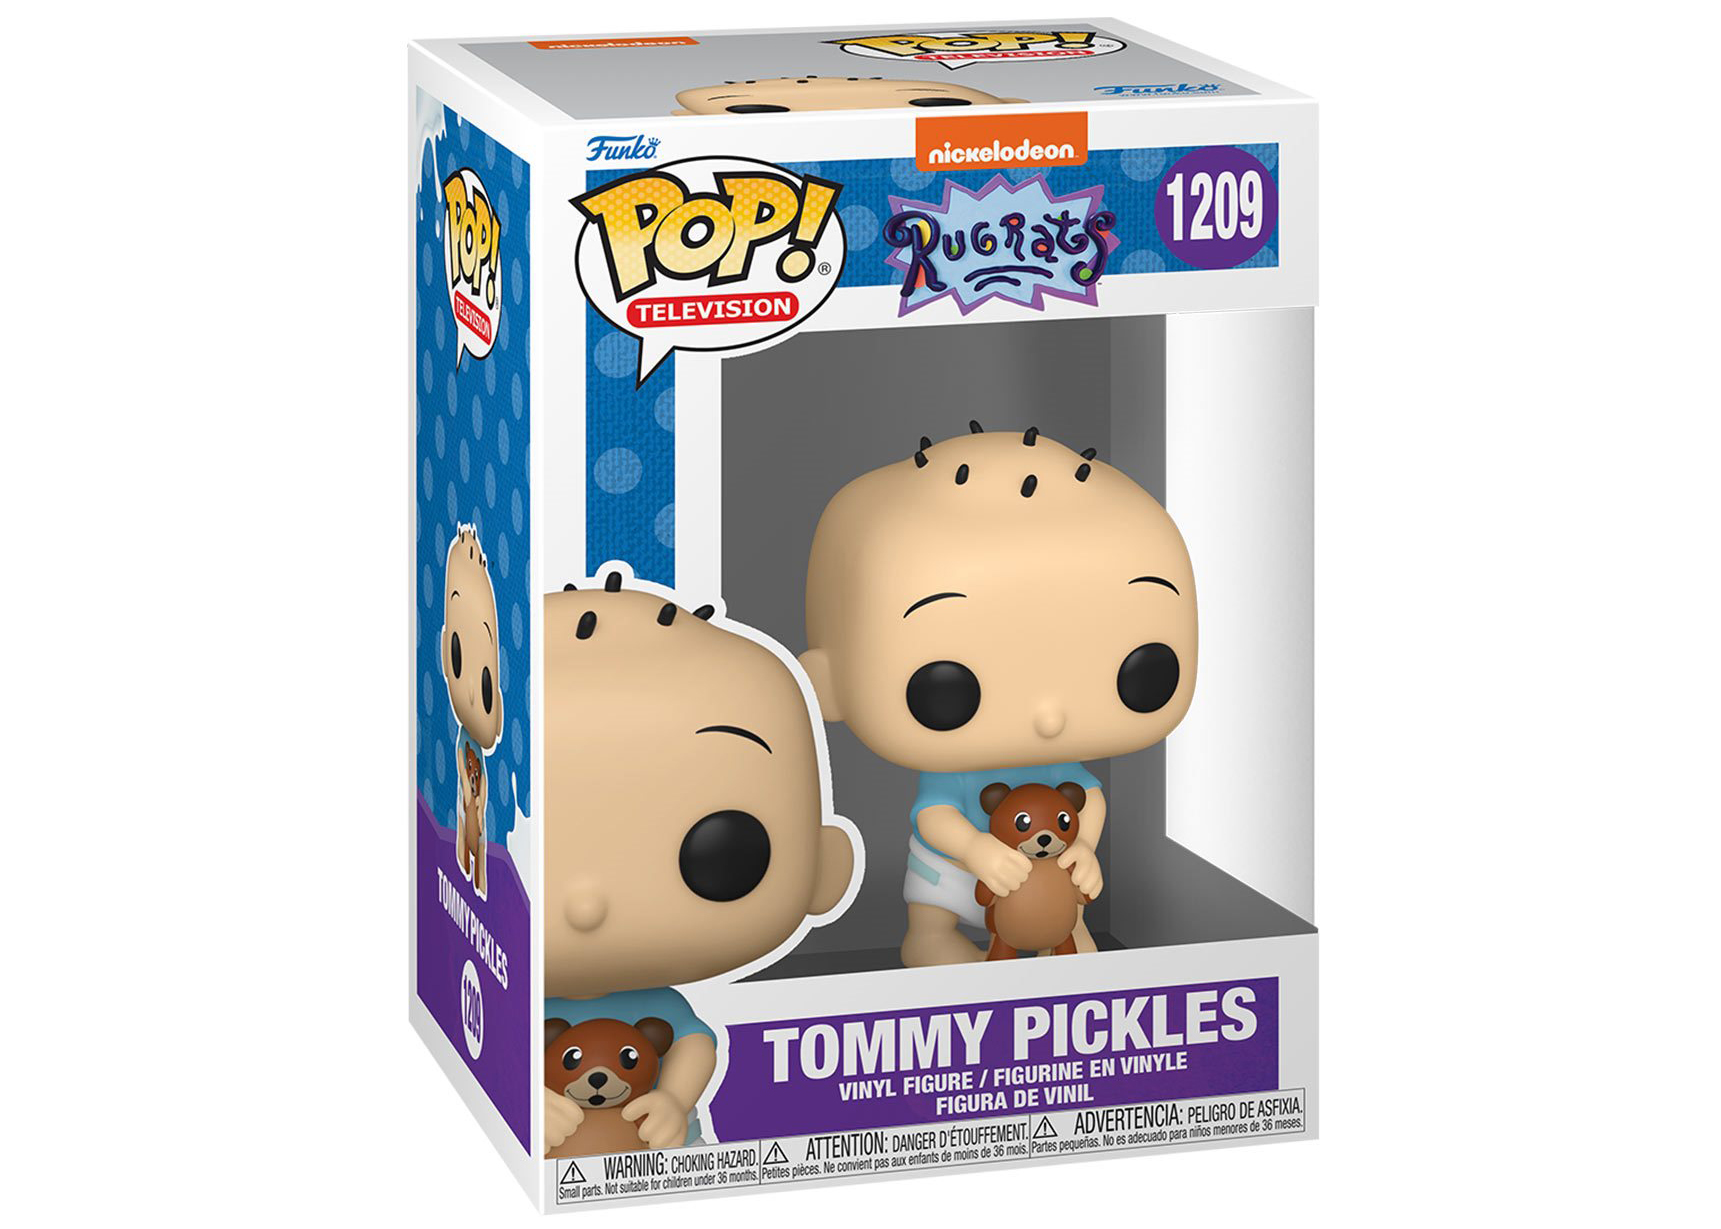 Funko Pop! Television Rugrats Tommy Pickles Figure #1209 - US